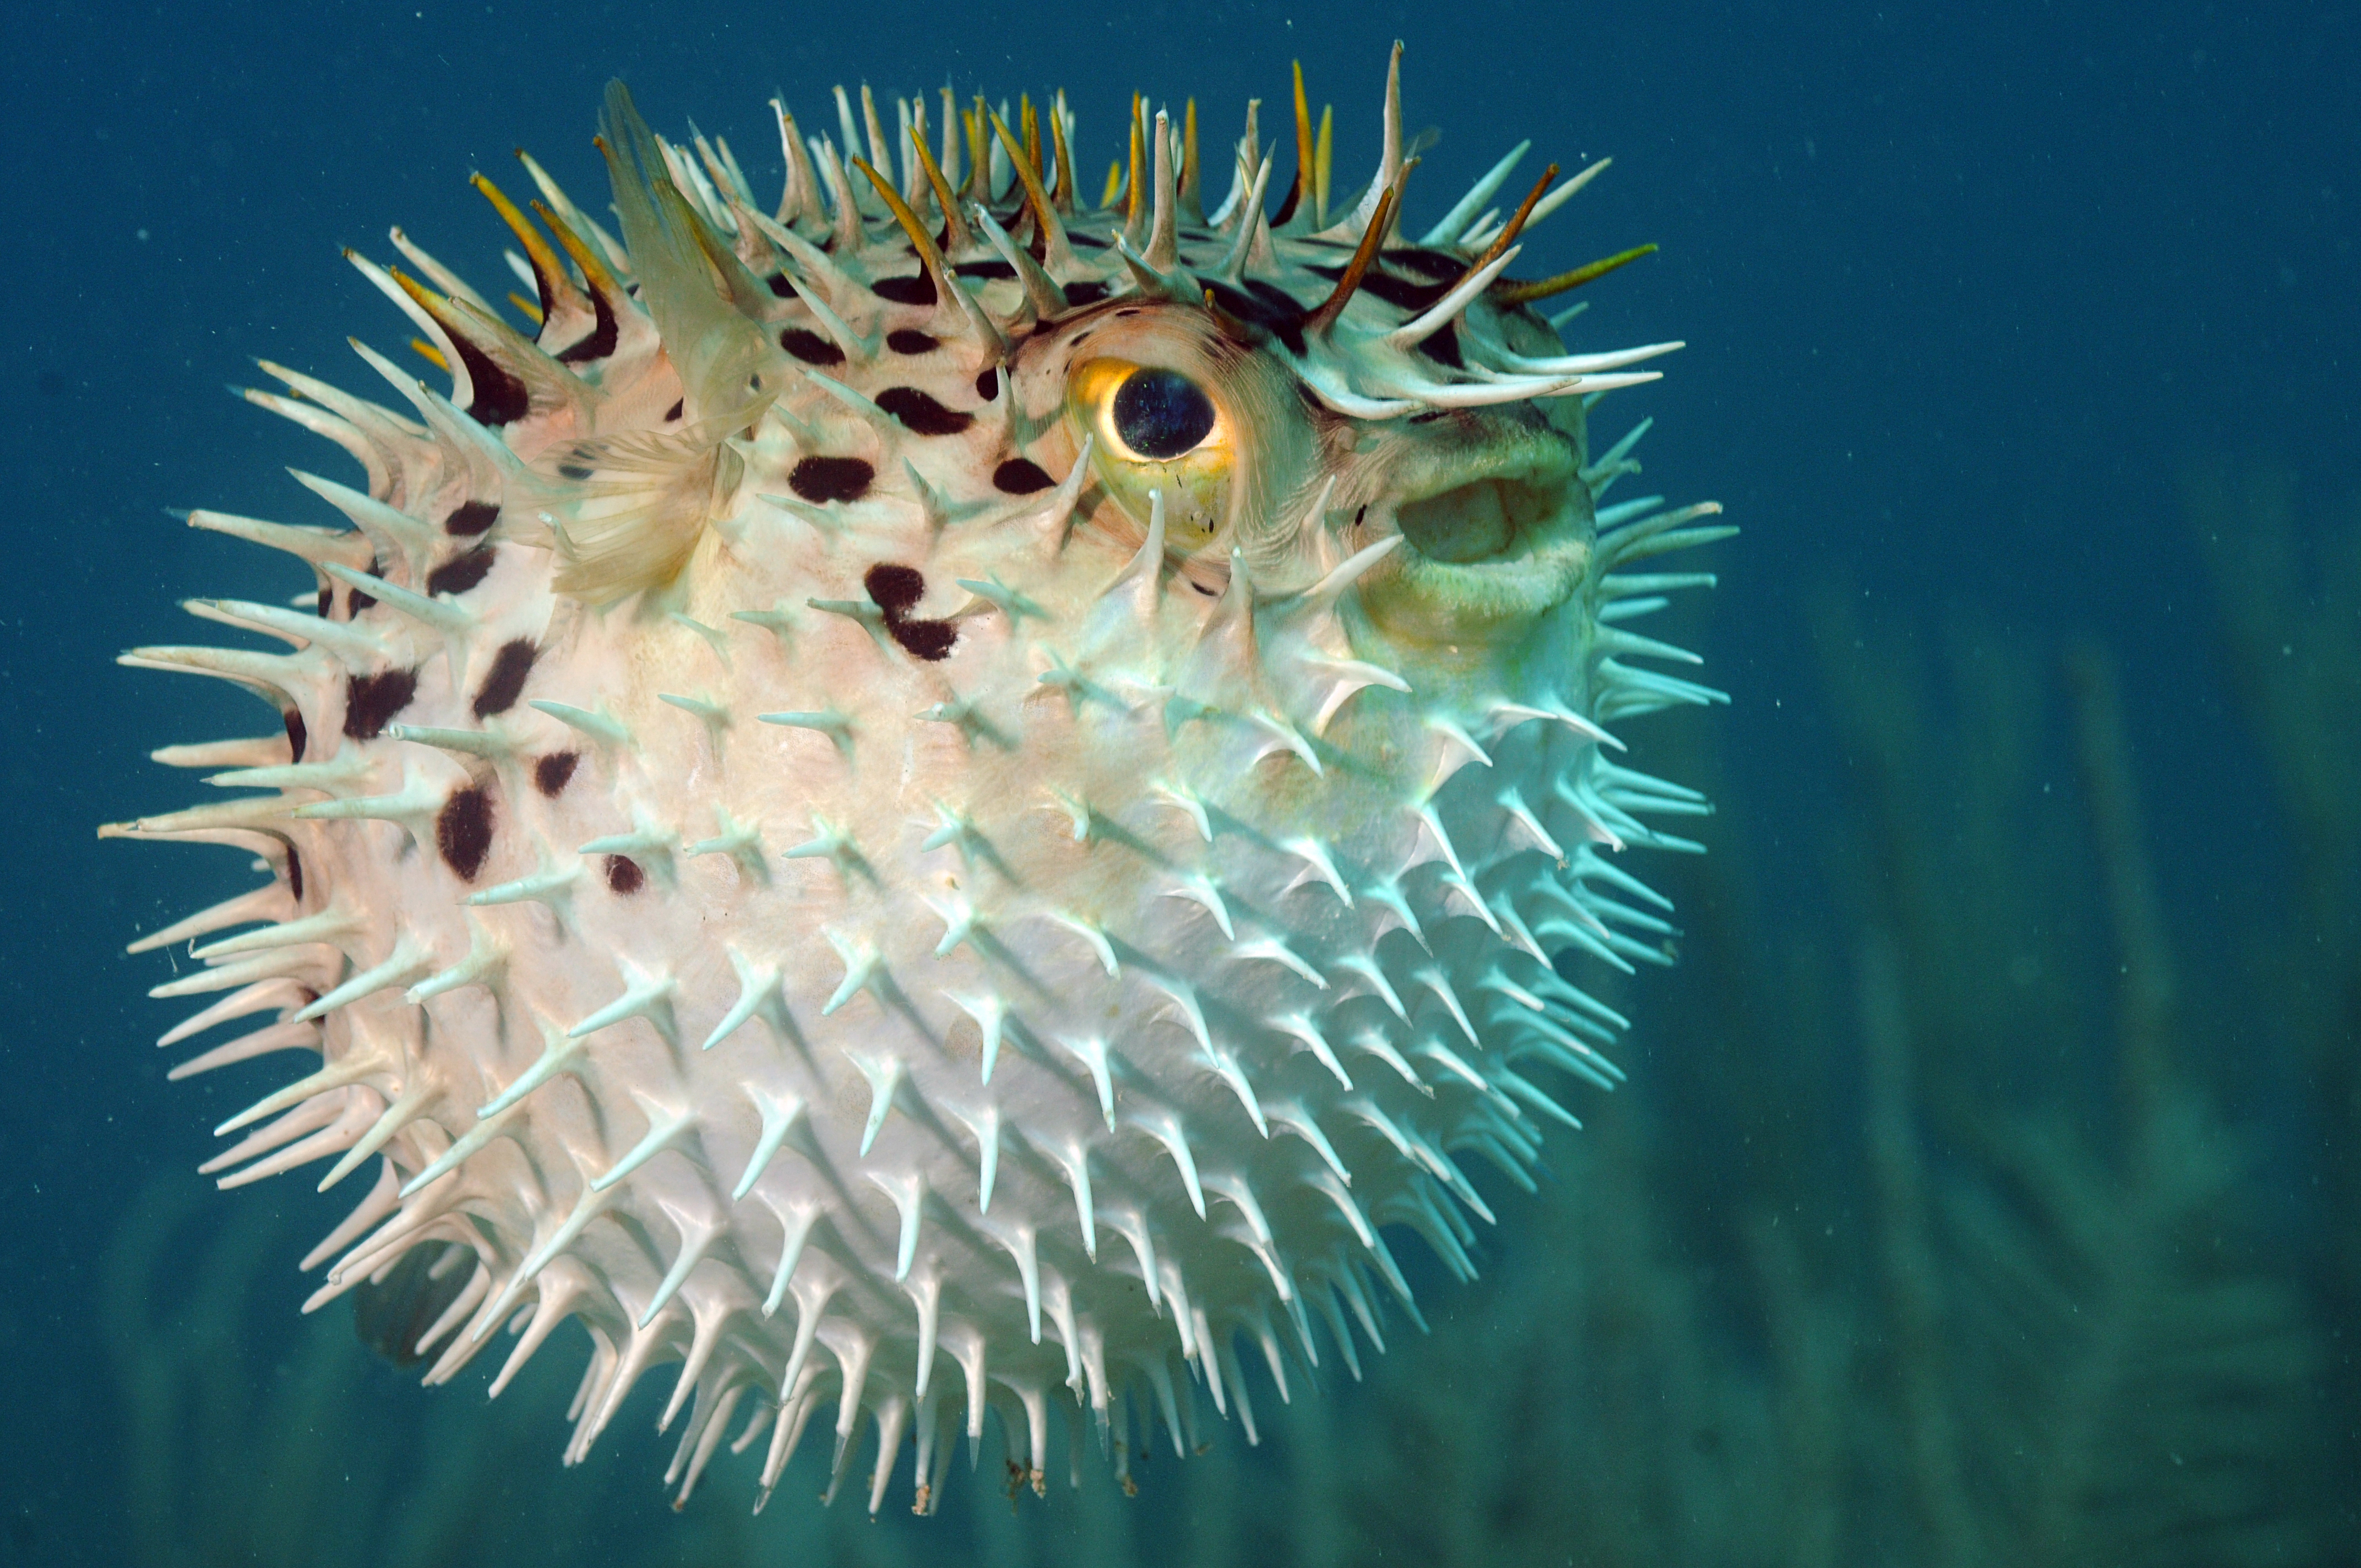 But no reproach to the puffer fish: it tries hard not to be swallowed. | FtLaud/Shutterstock.com